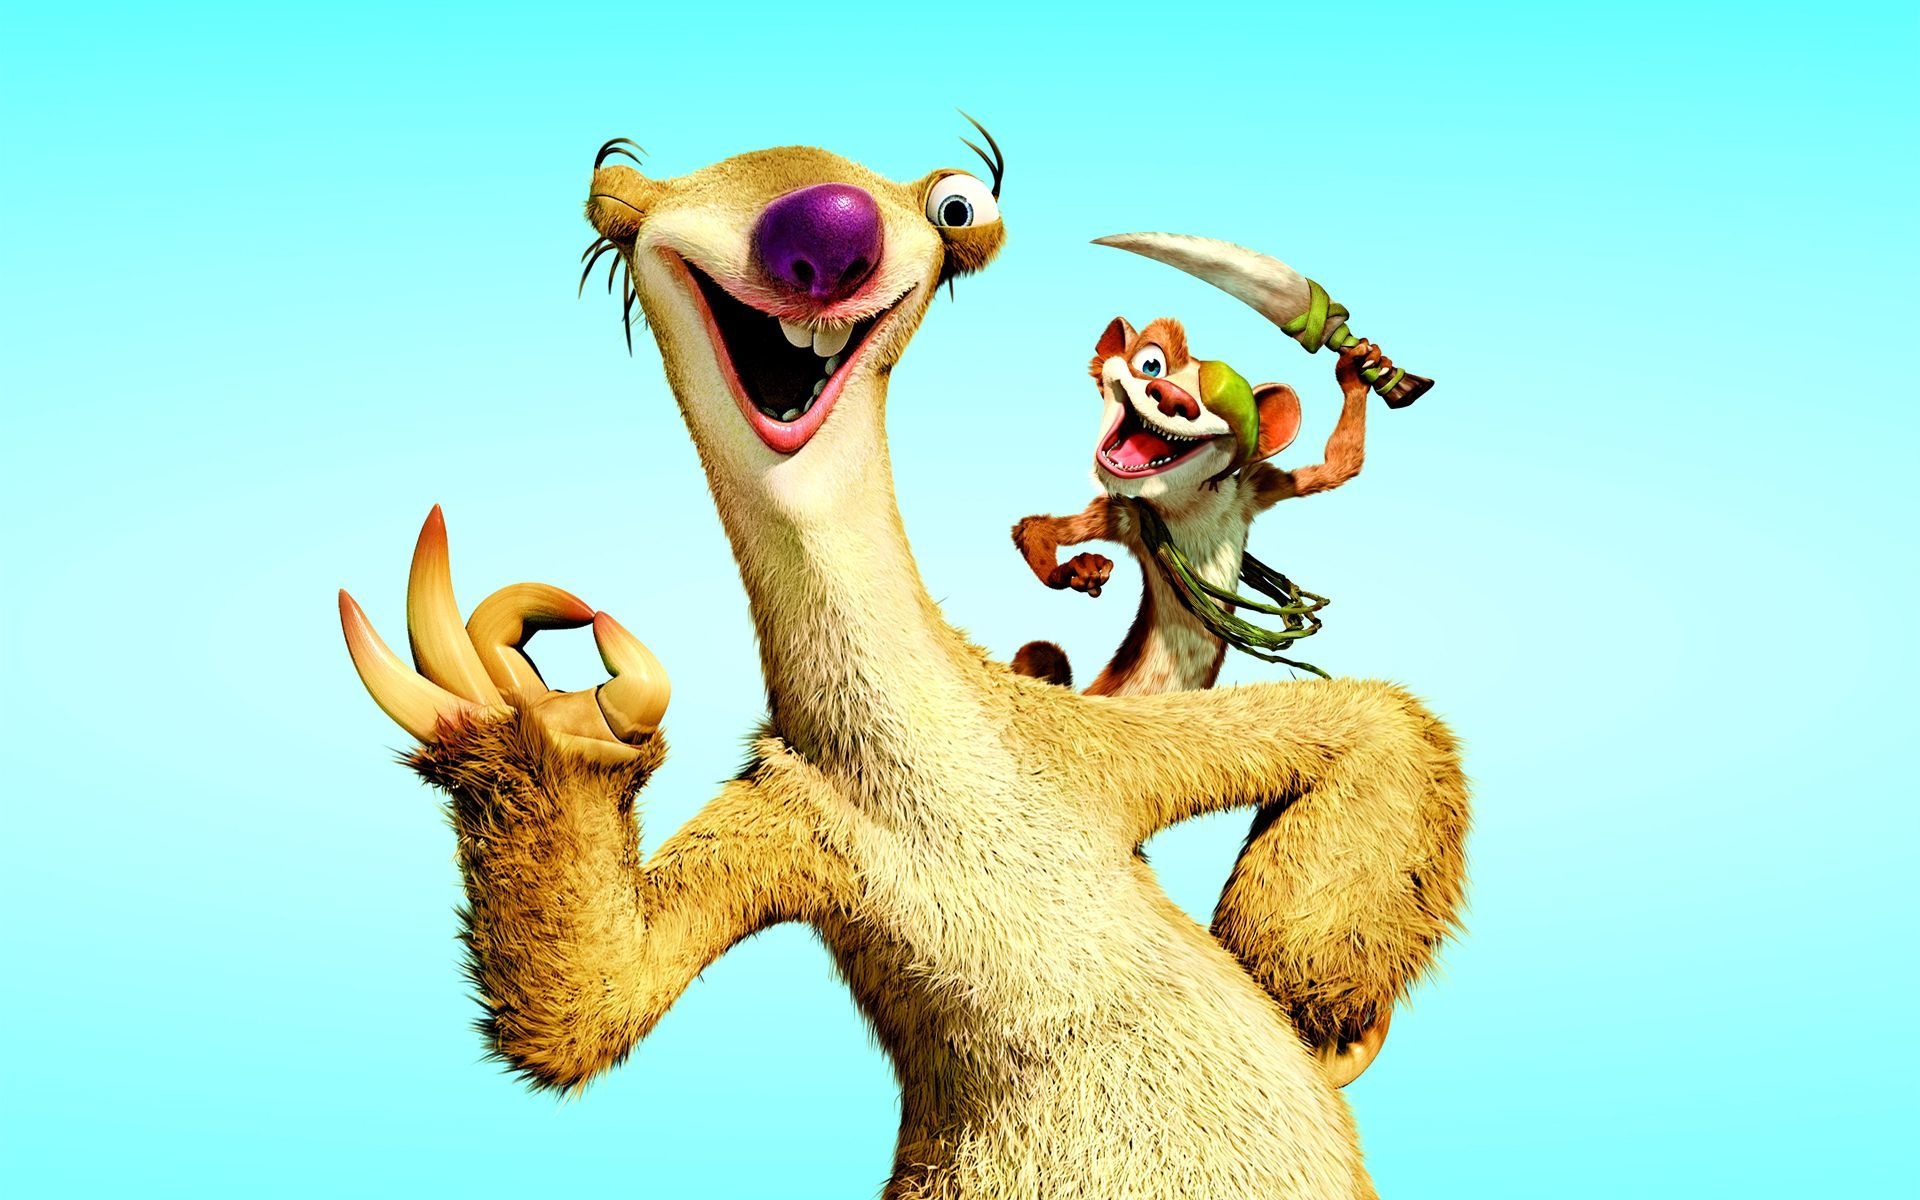 Ice Age franchise, Cartoon ice age wallpapers, Cool wallpaper collection, Ice age characters, 1920x1200 HD Desktop